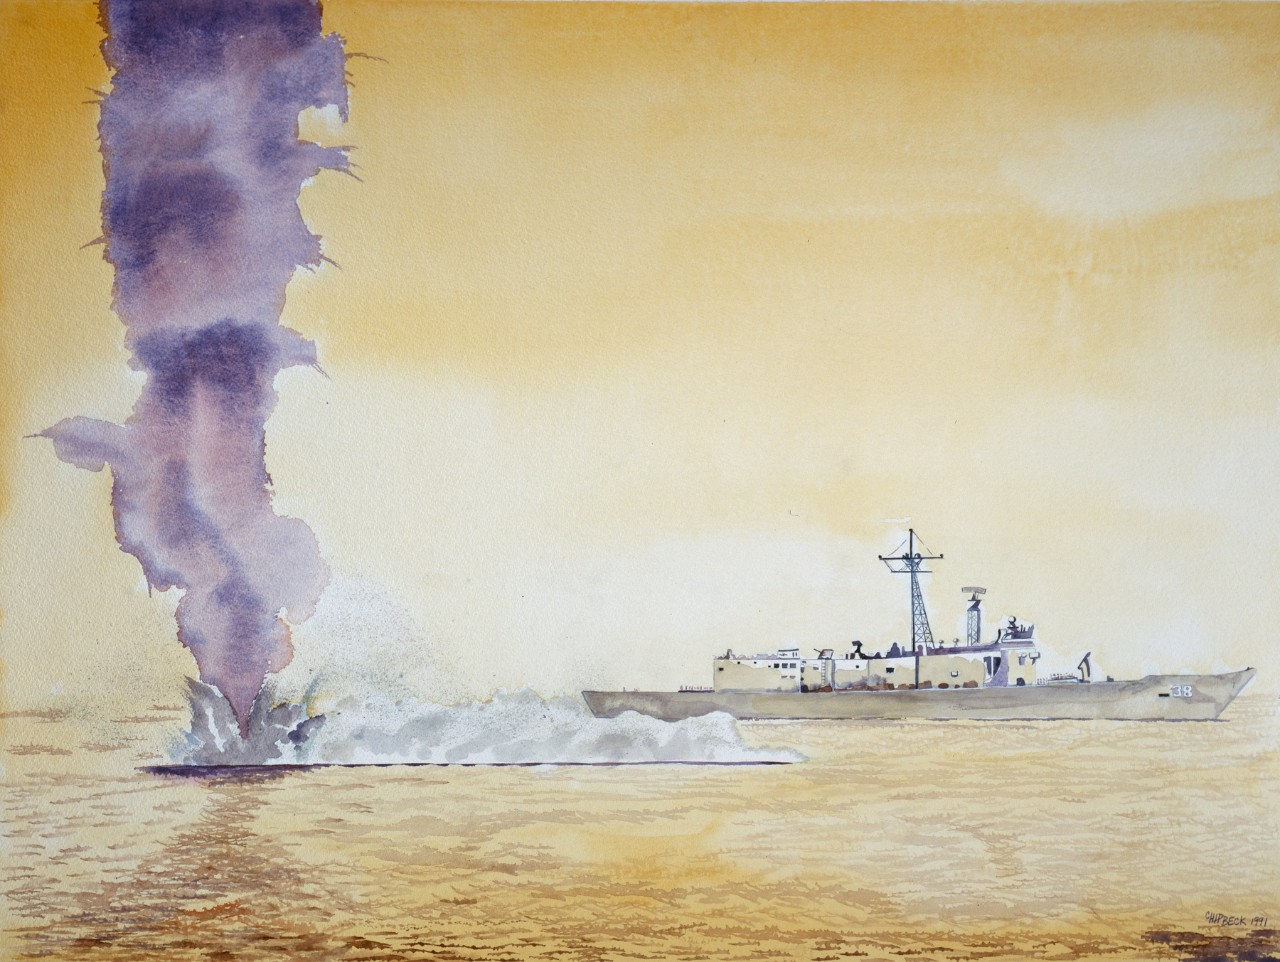 A ship passing in front of a plume of water rising out of the ocean